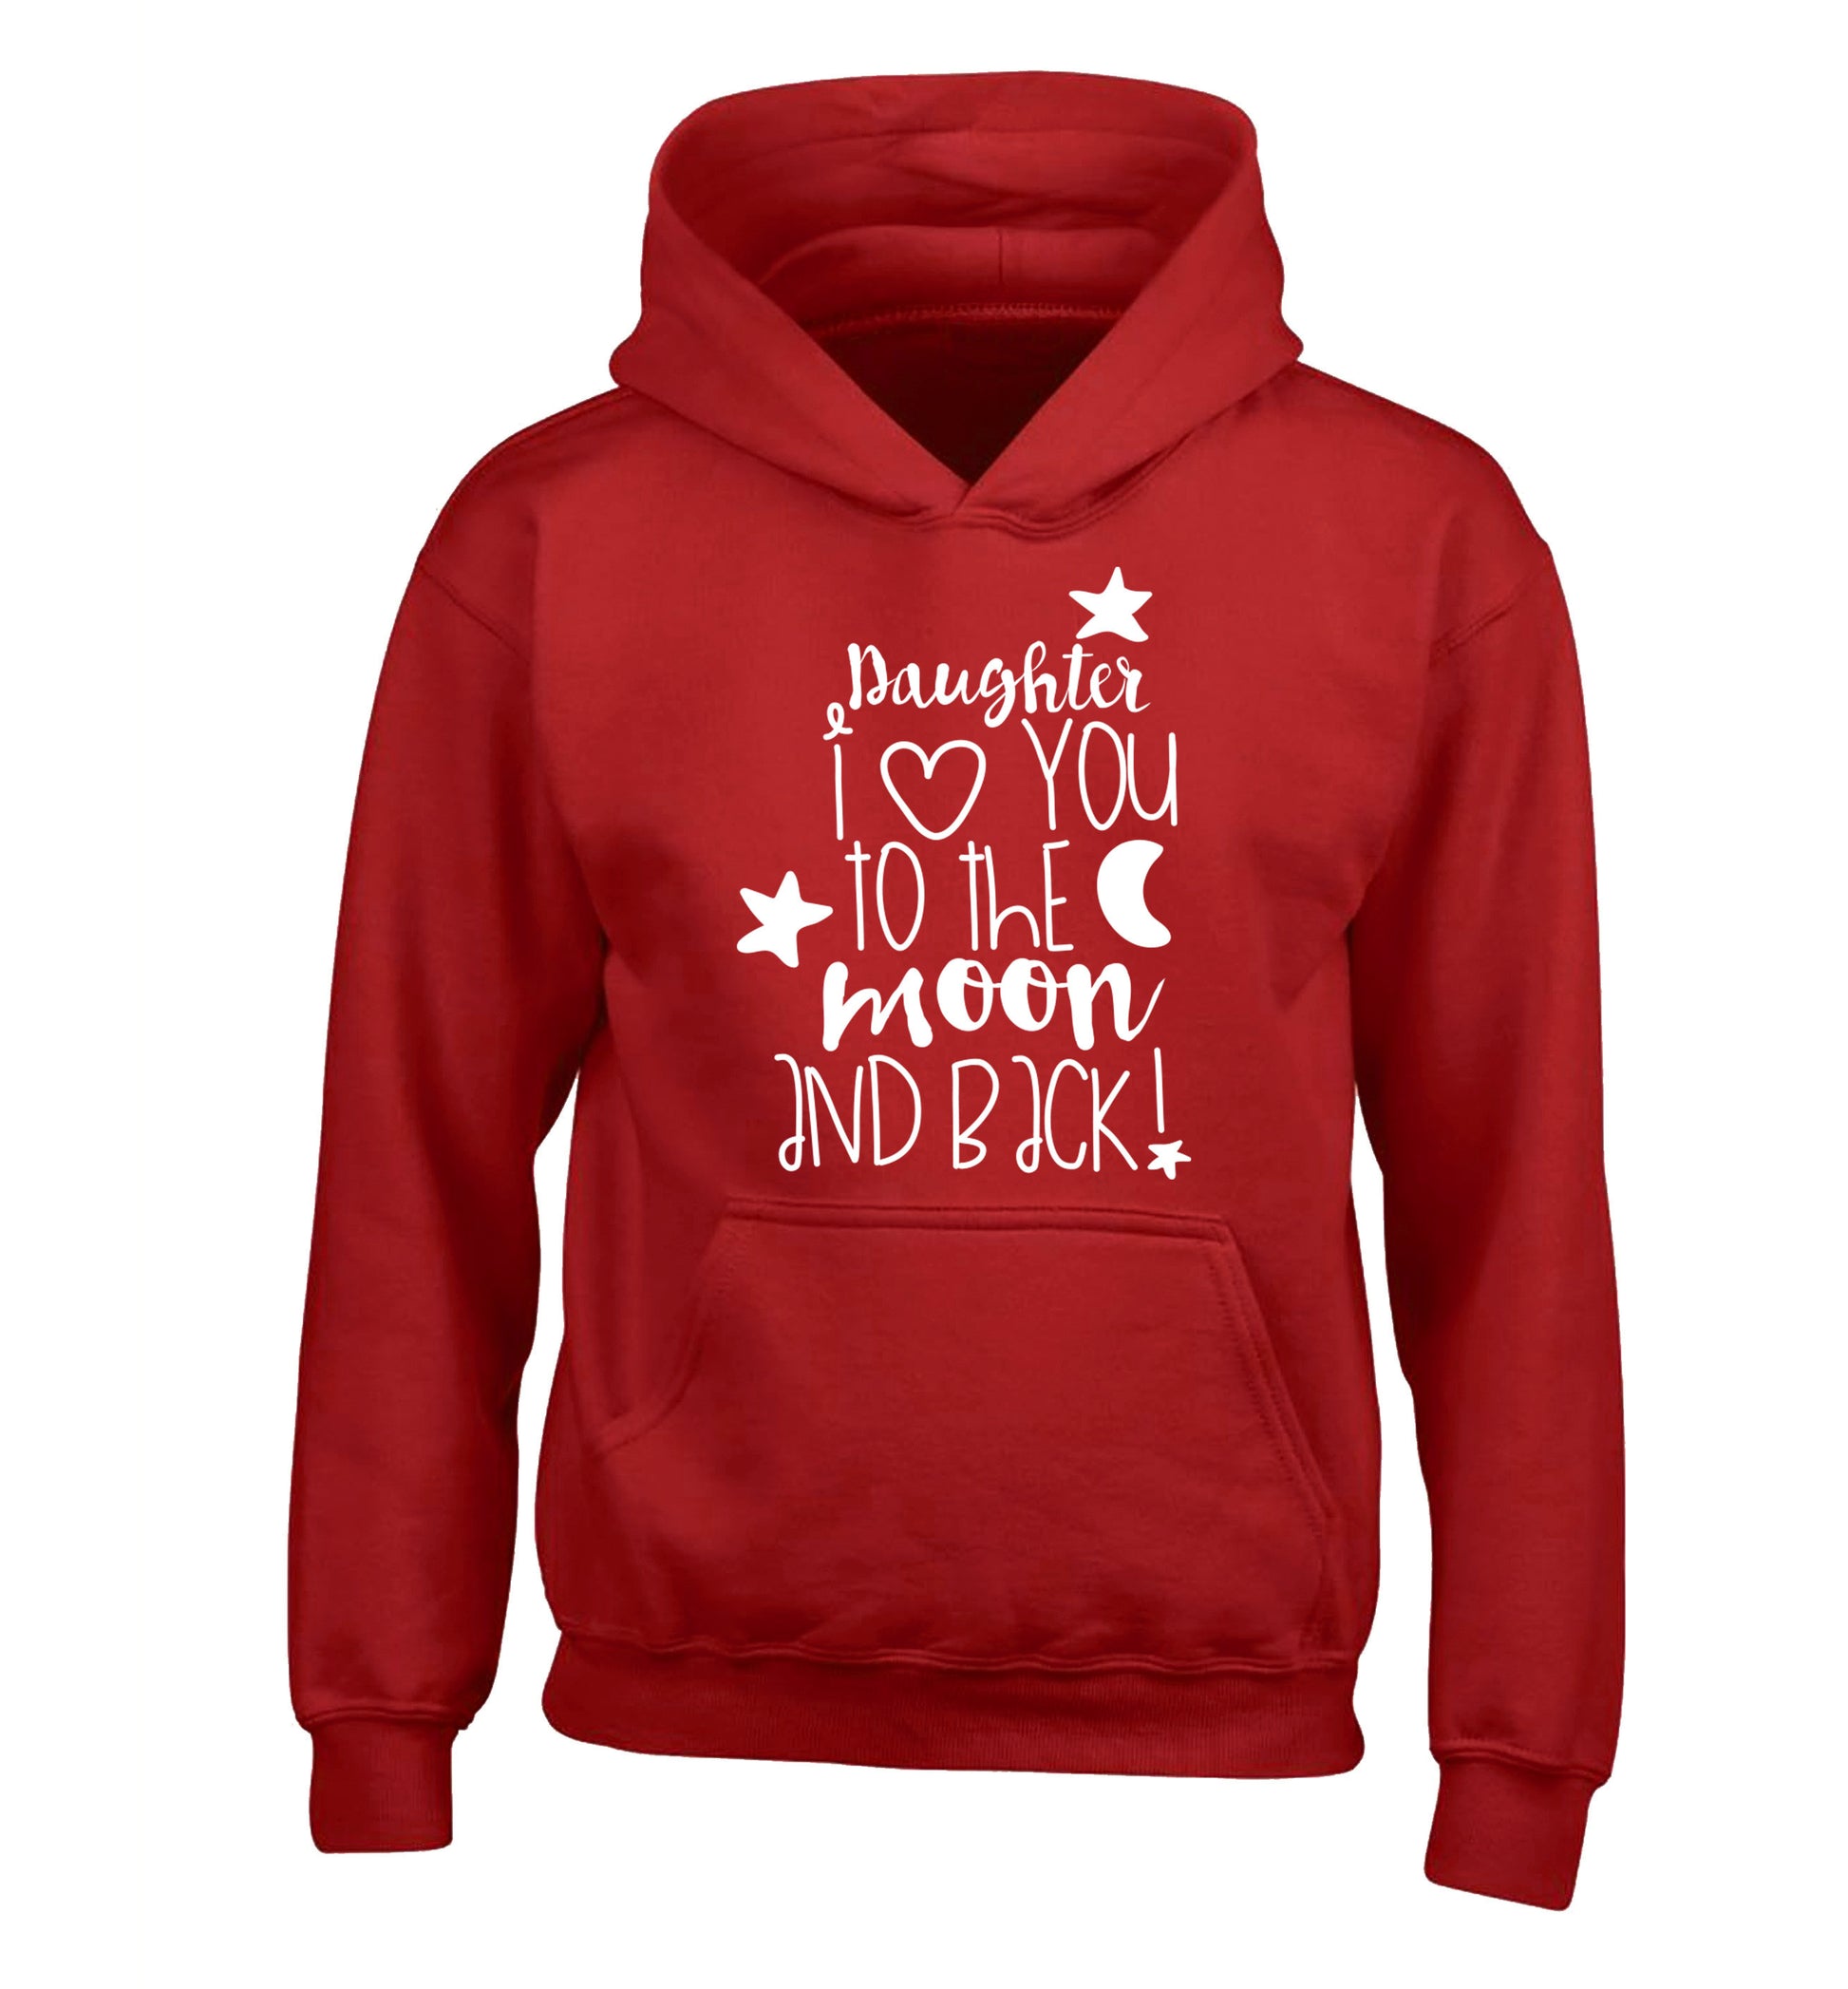 Daughter I love you to the moon and back children's red hoodie 12-14 Years